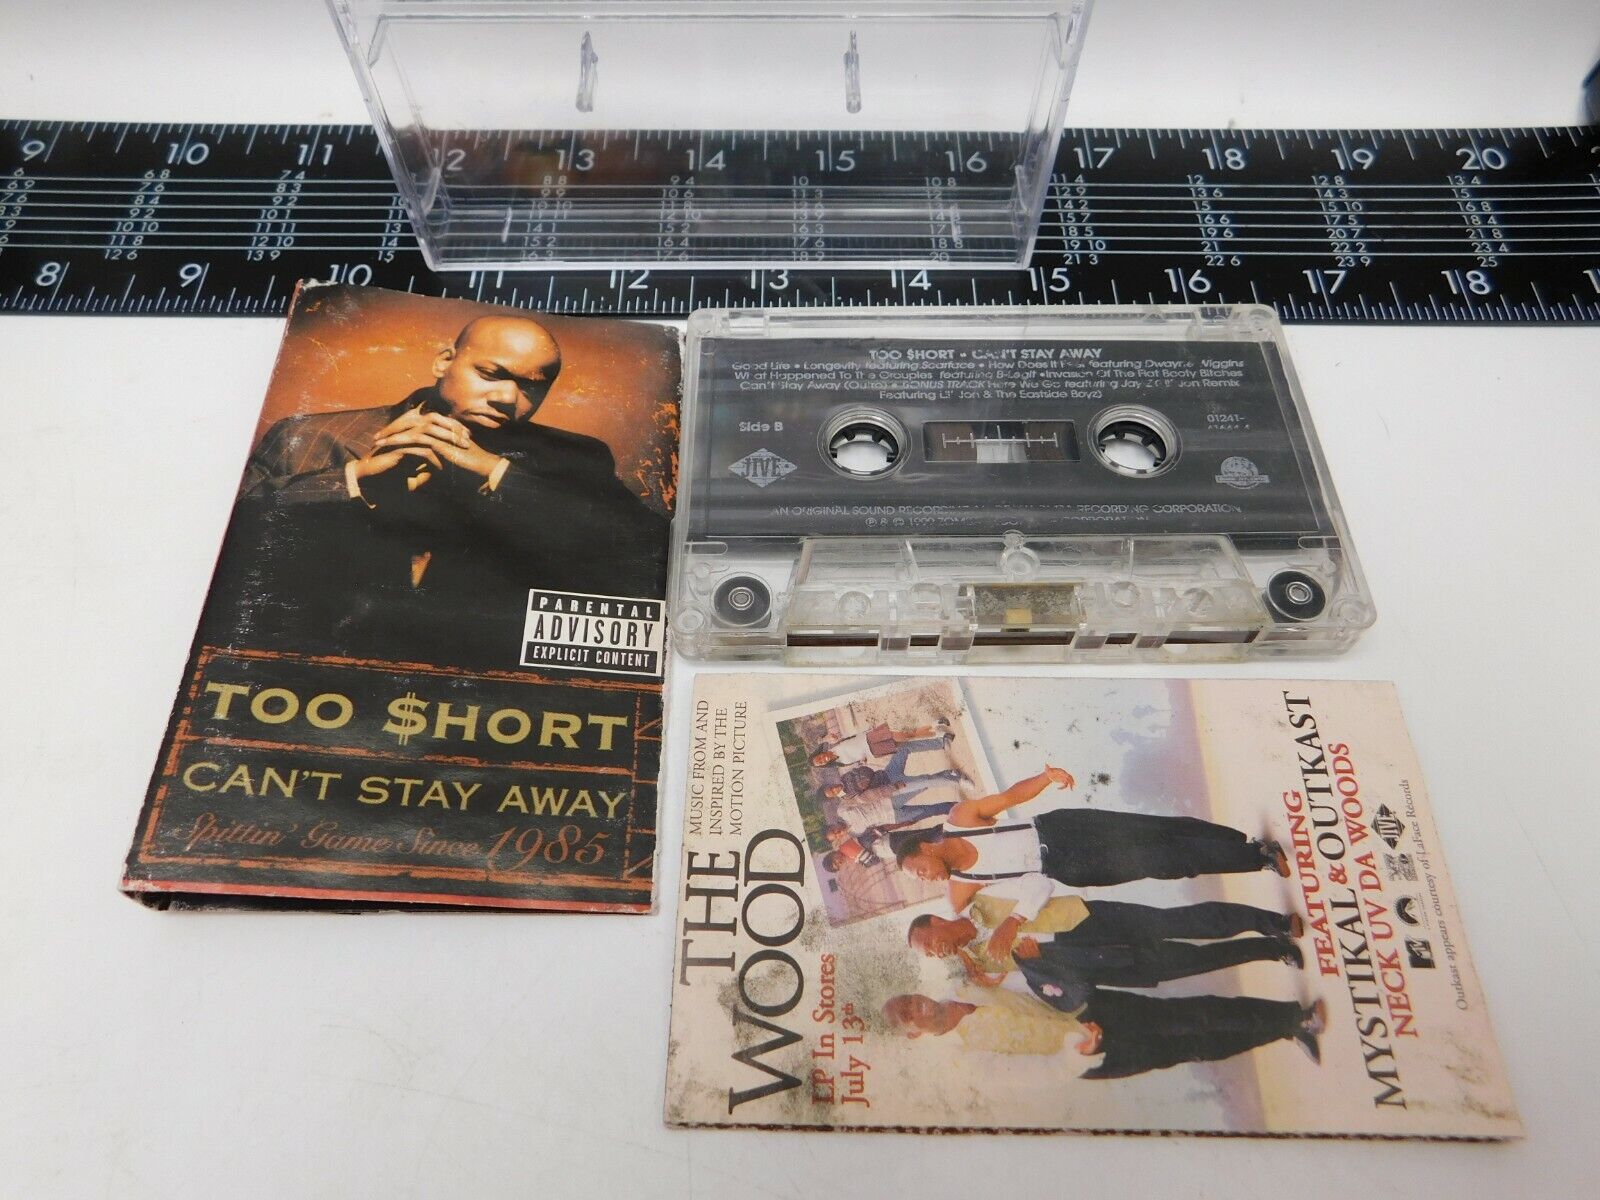 Too Short Cassette Can't Stay Away Audio Tape 41644-4 C16-3